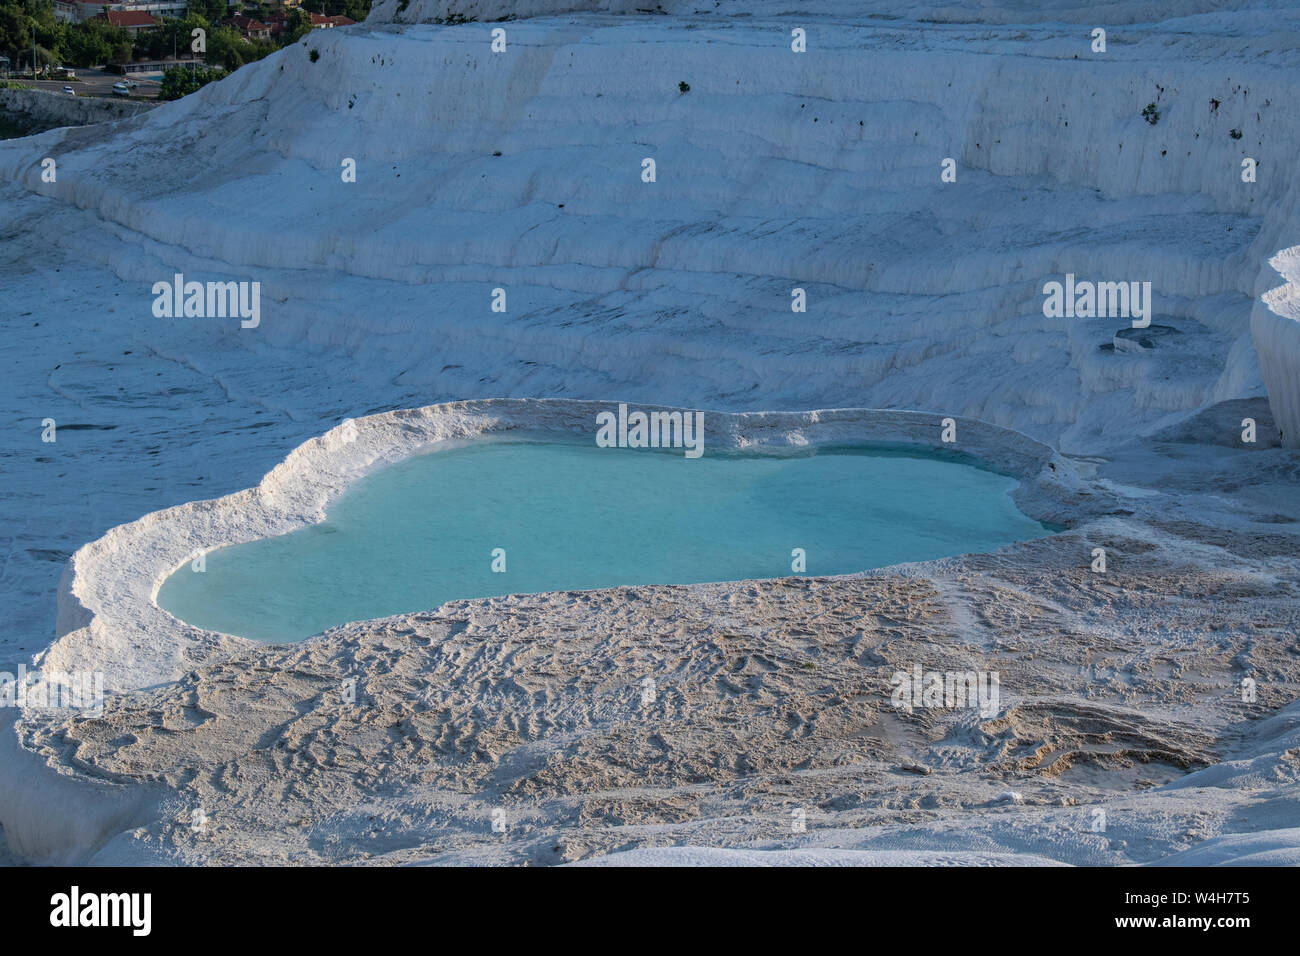 Turkey: details of the calcium pools on travertine terraces at Pamukkale (Cotton Castle), natural site of sedimentary rock deposited by hot springs Stock Photo